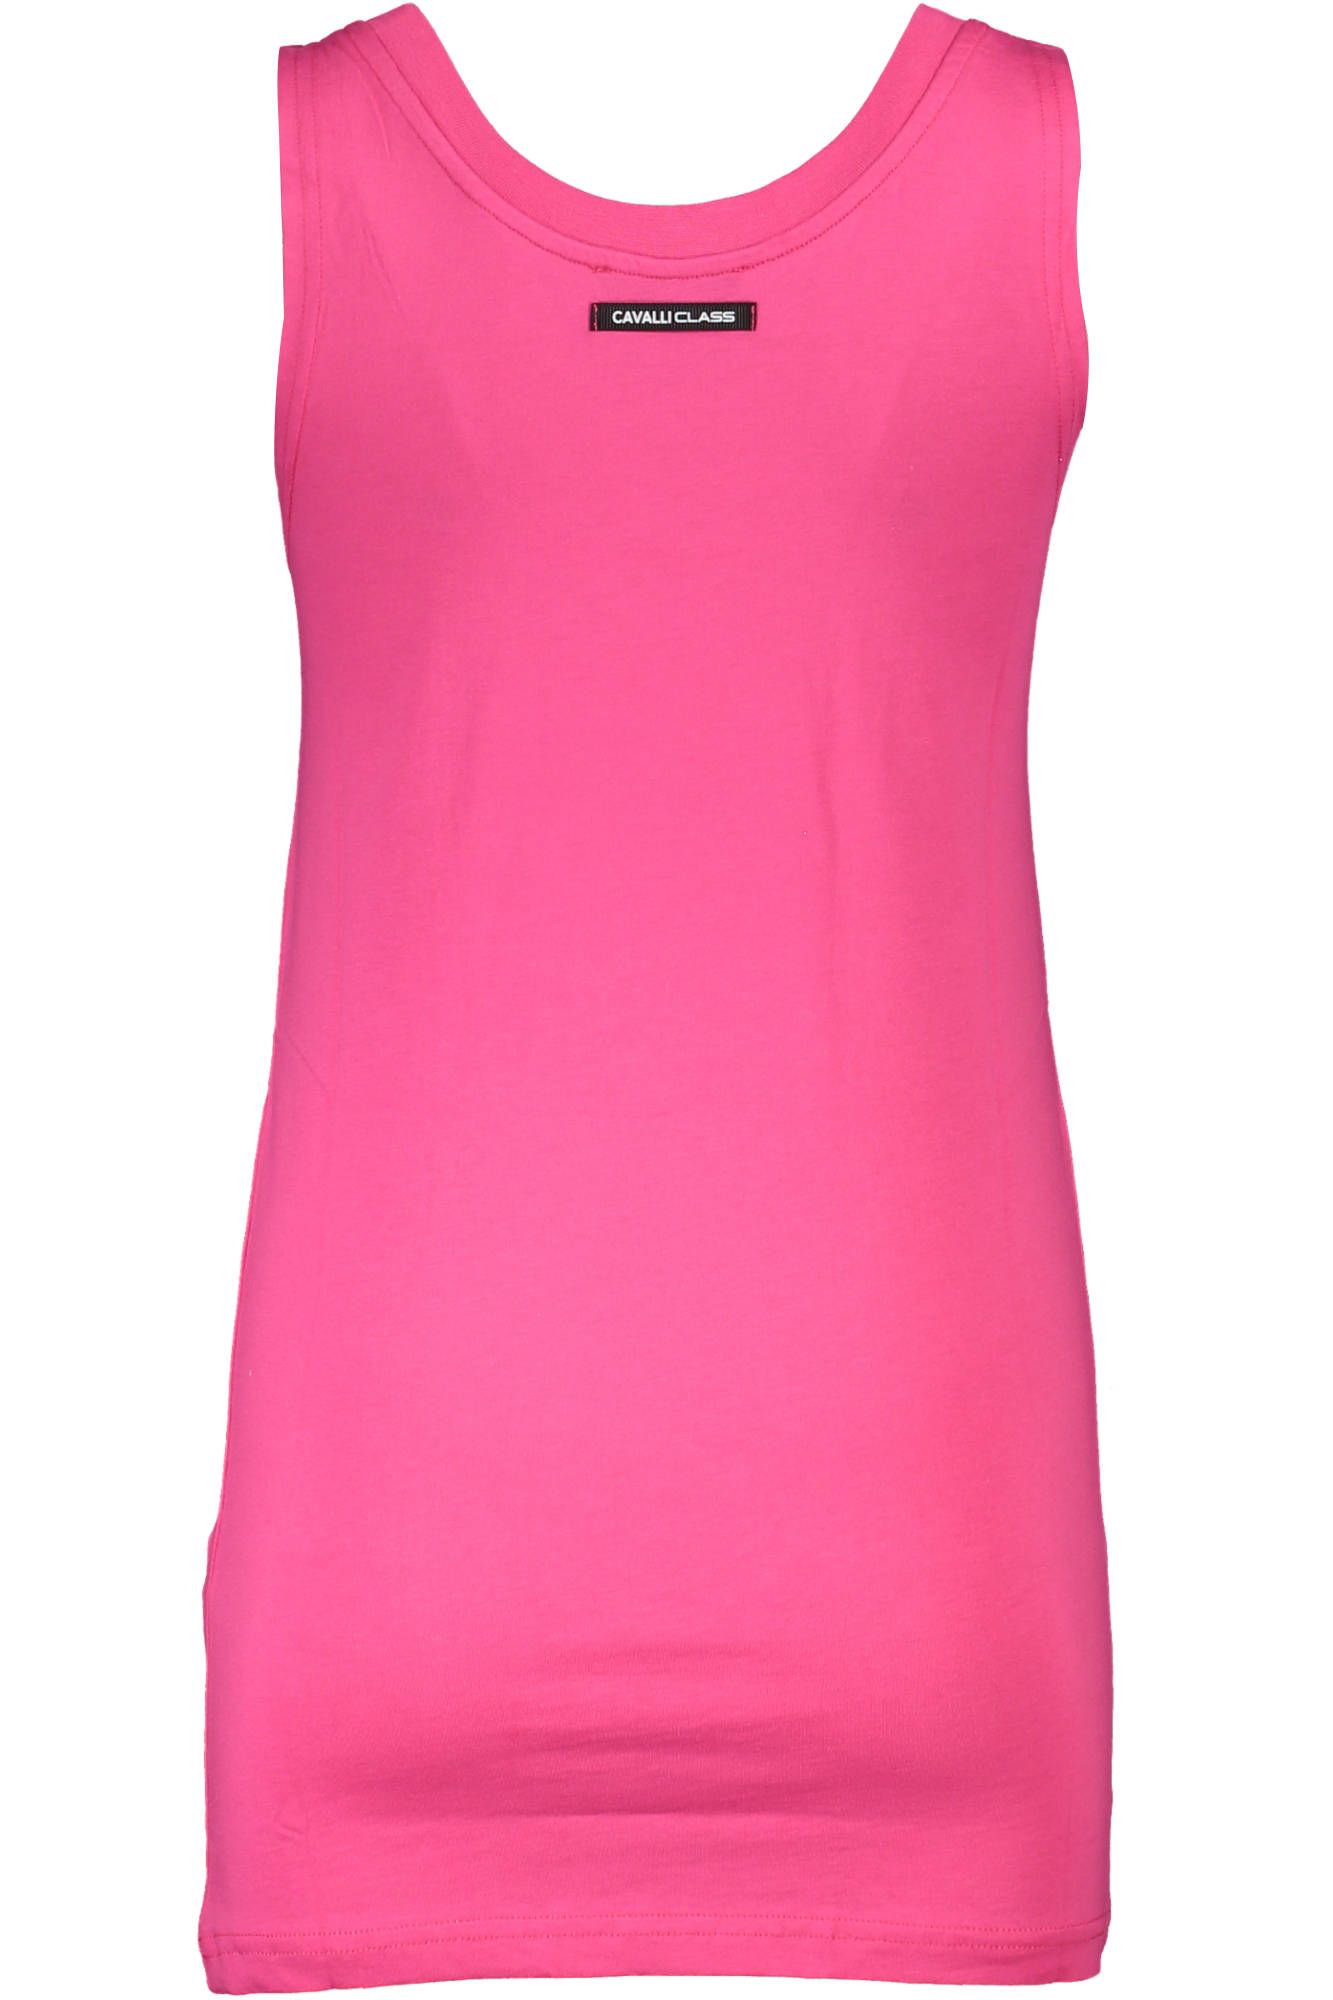 Cavalli Class Chic Pink Printed Tank Top with Logo